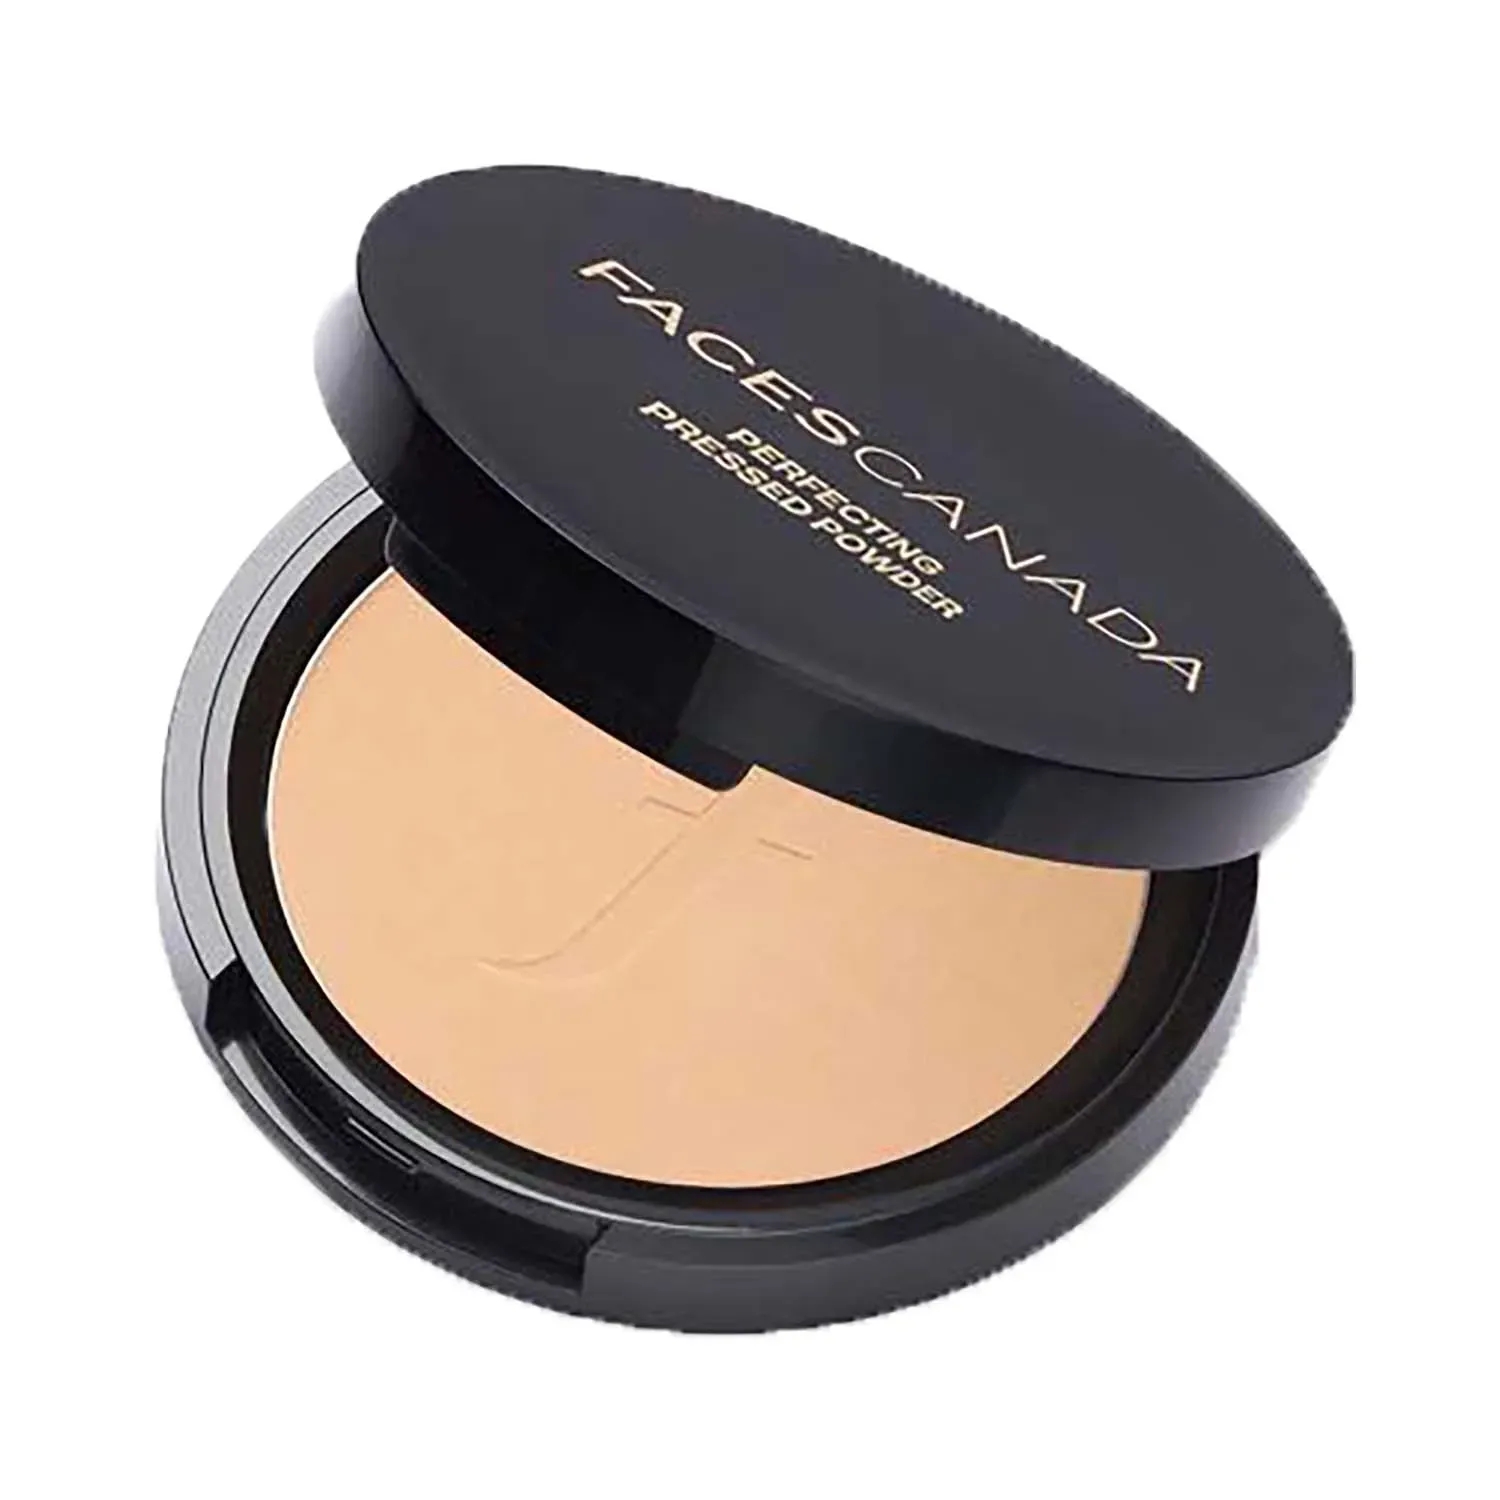 Faces Canada | Faces Canada Perfecting Pressed Powder - 02 Natural (9g)